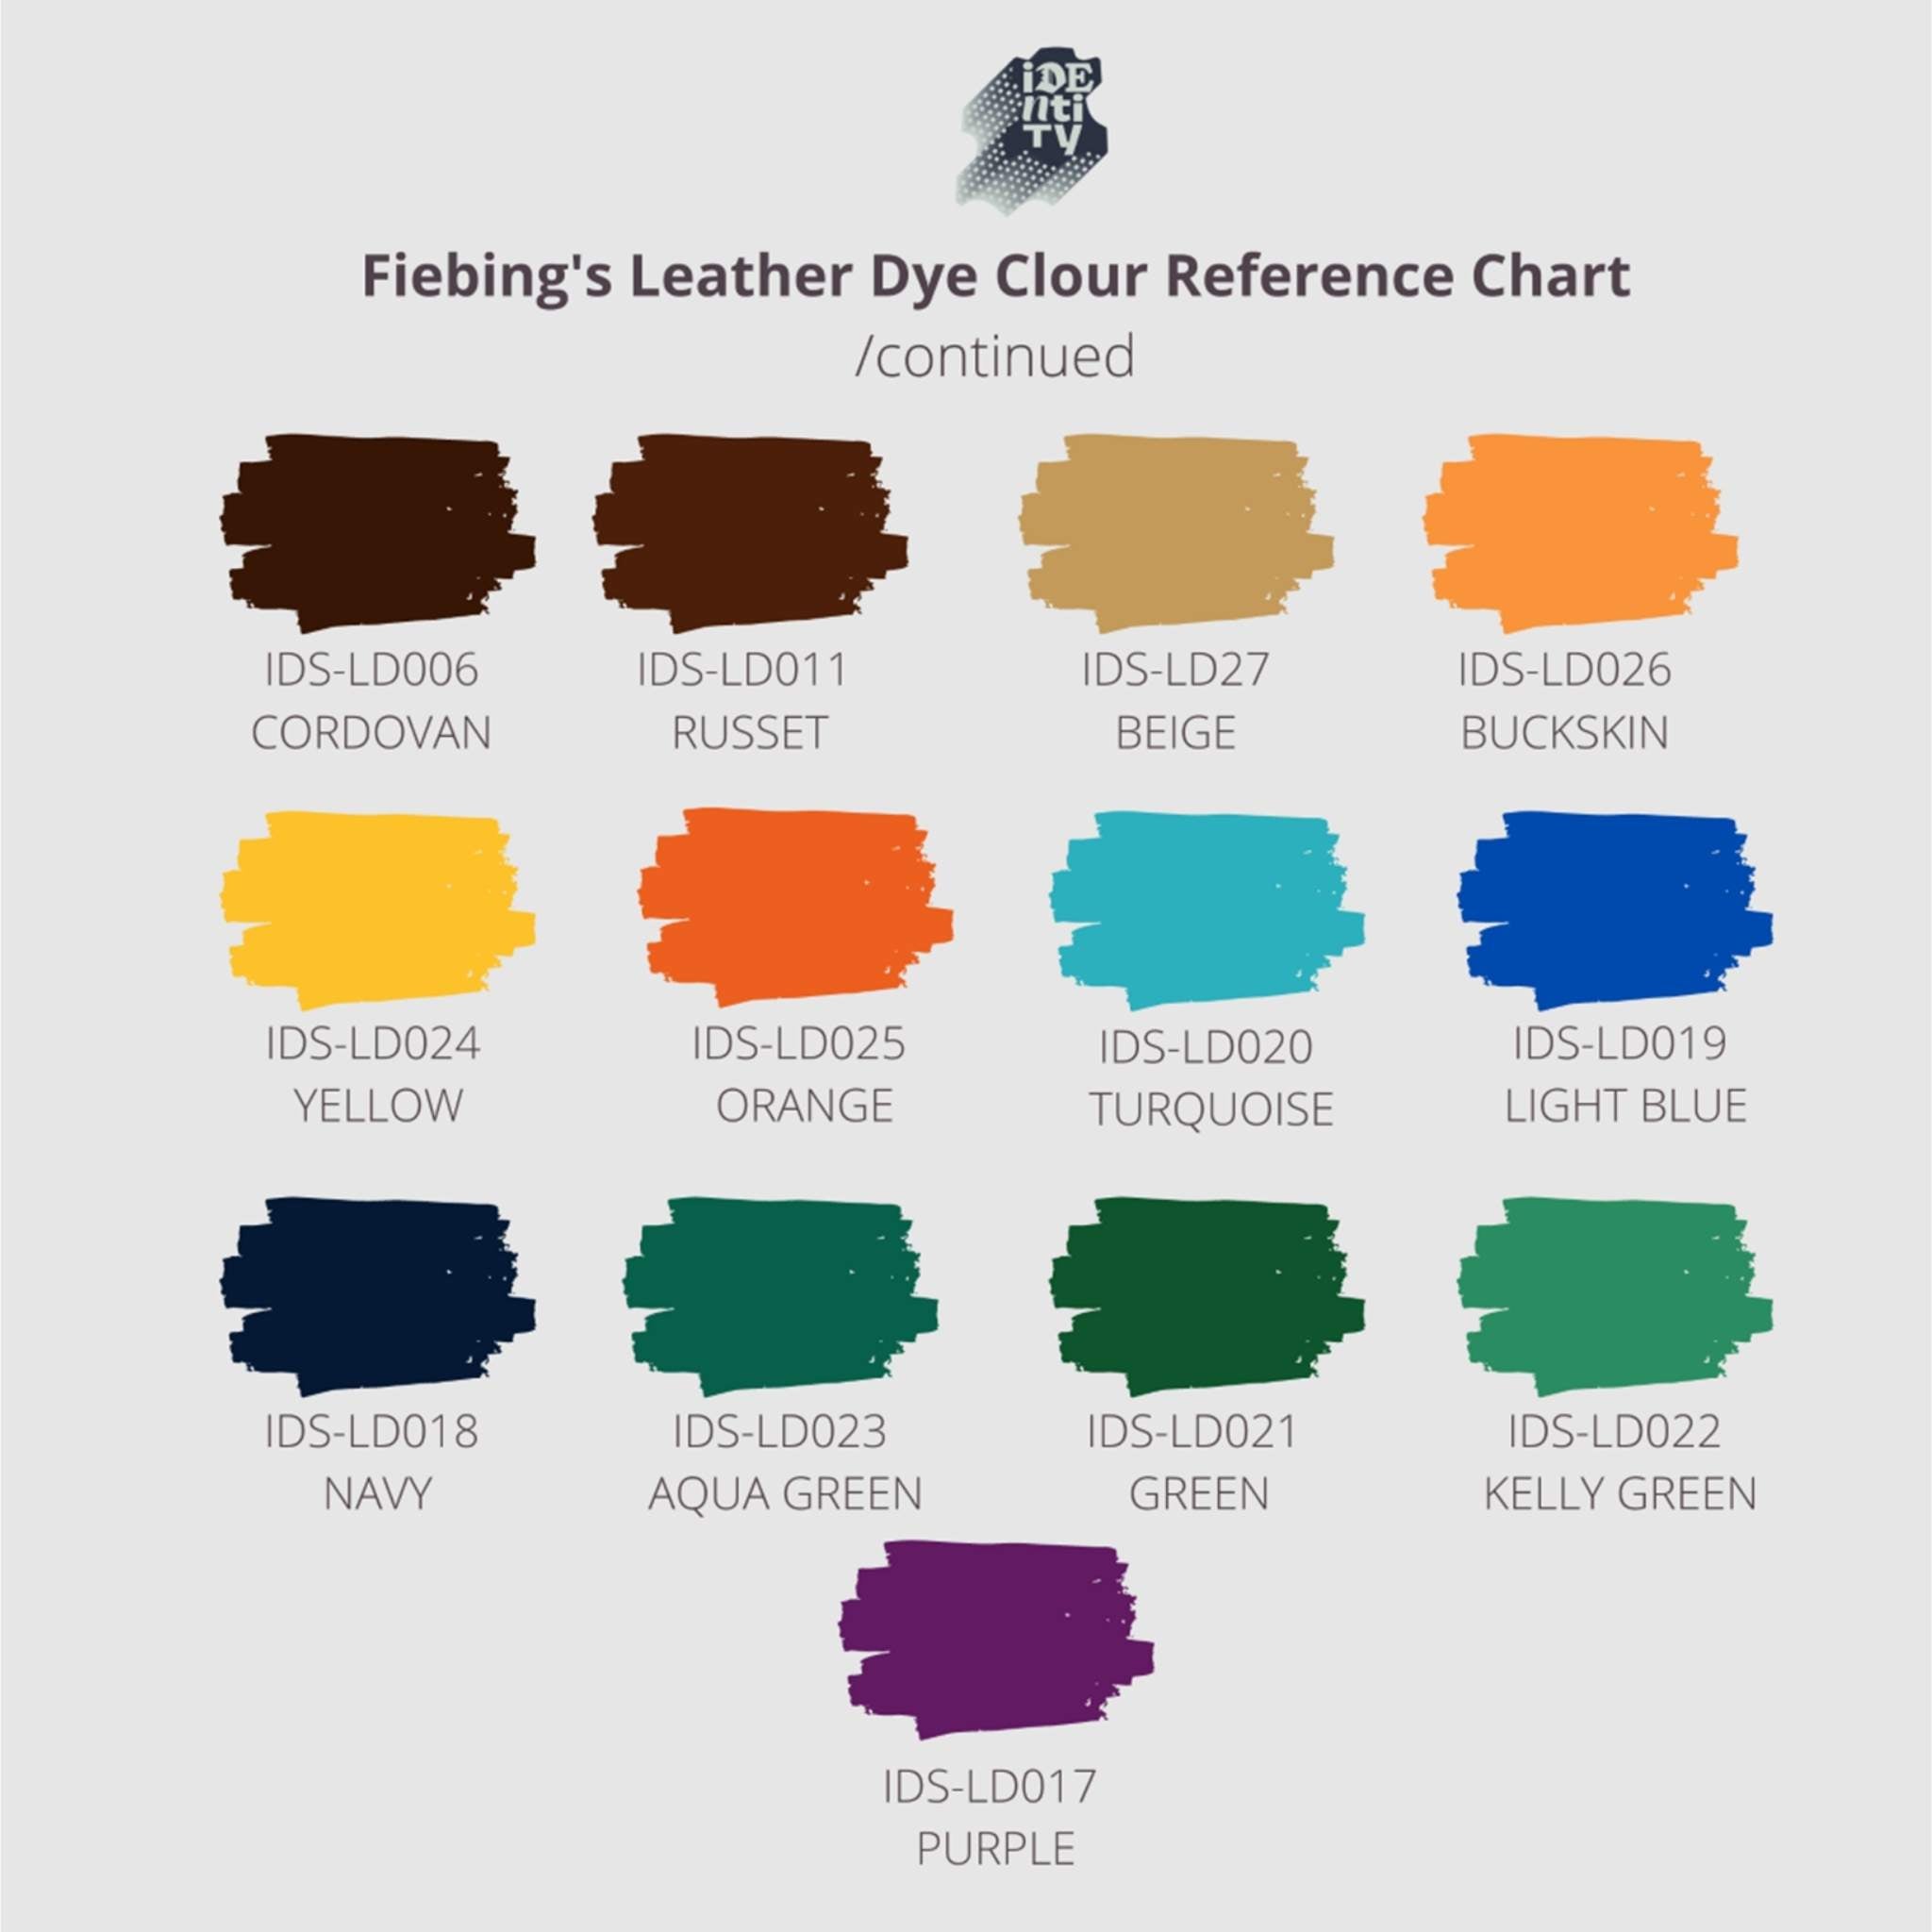 Fiebings Leather Dye Colour Chart Page 2